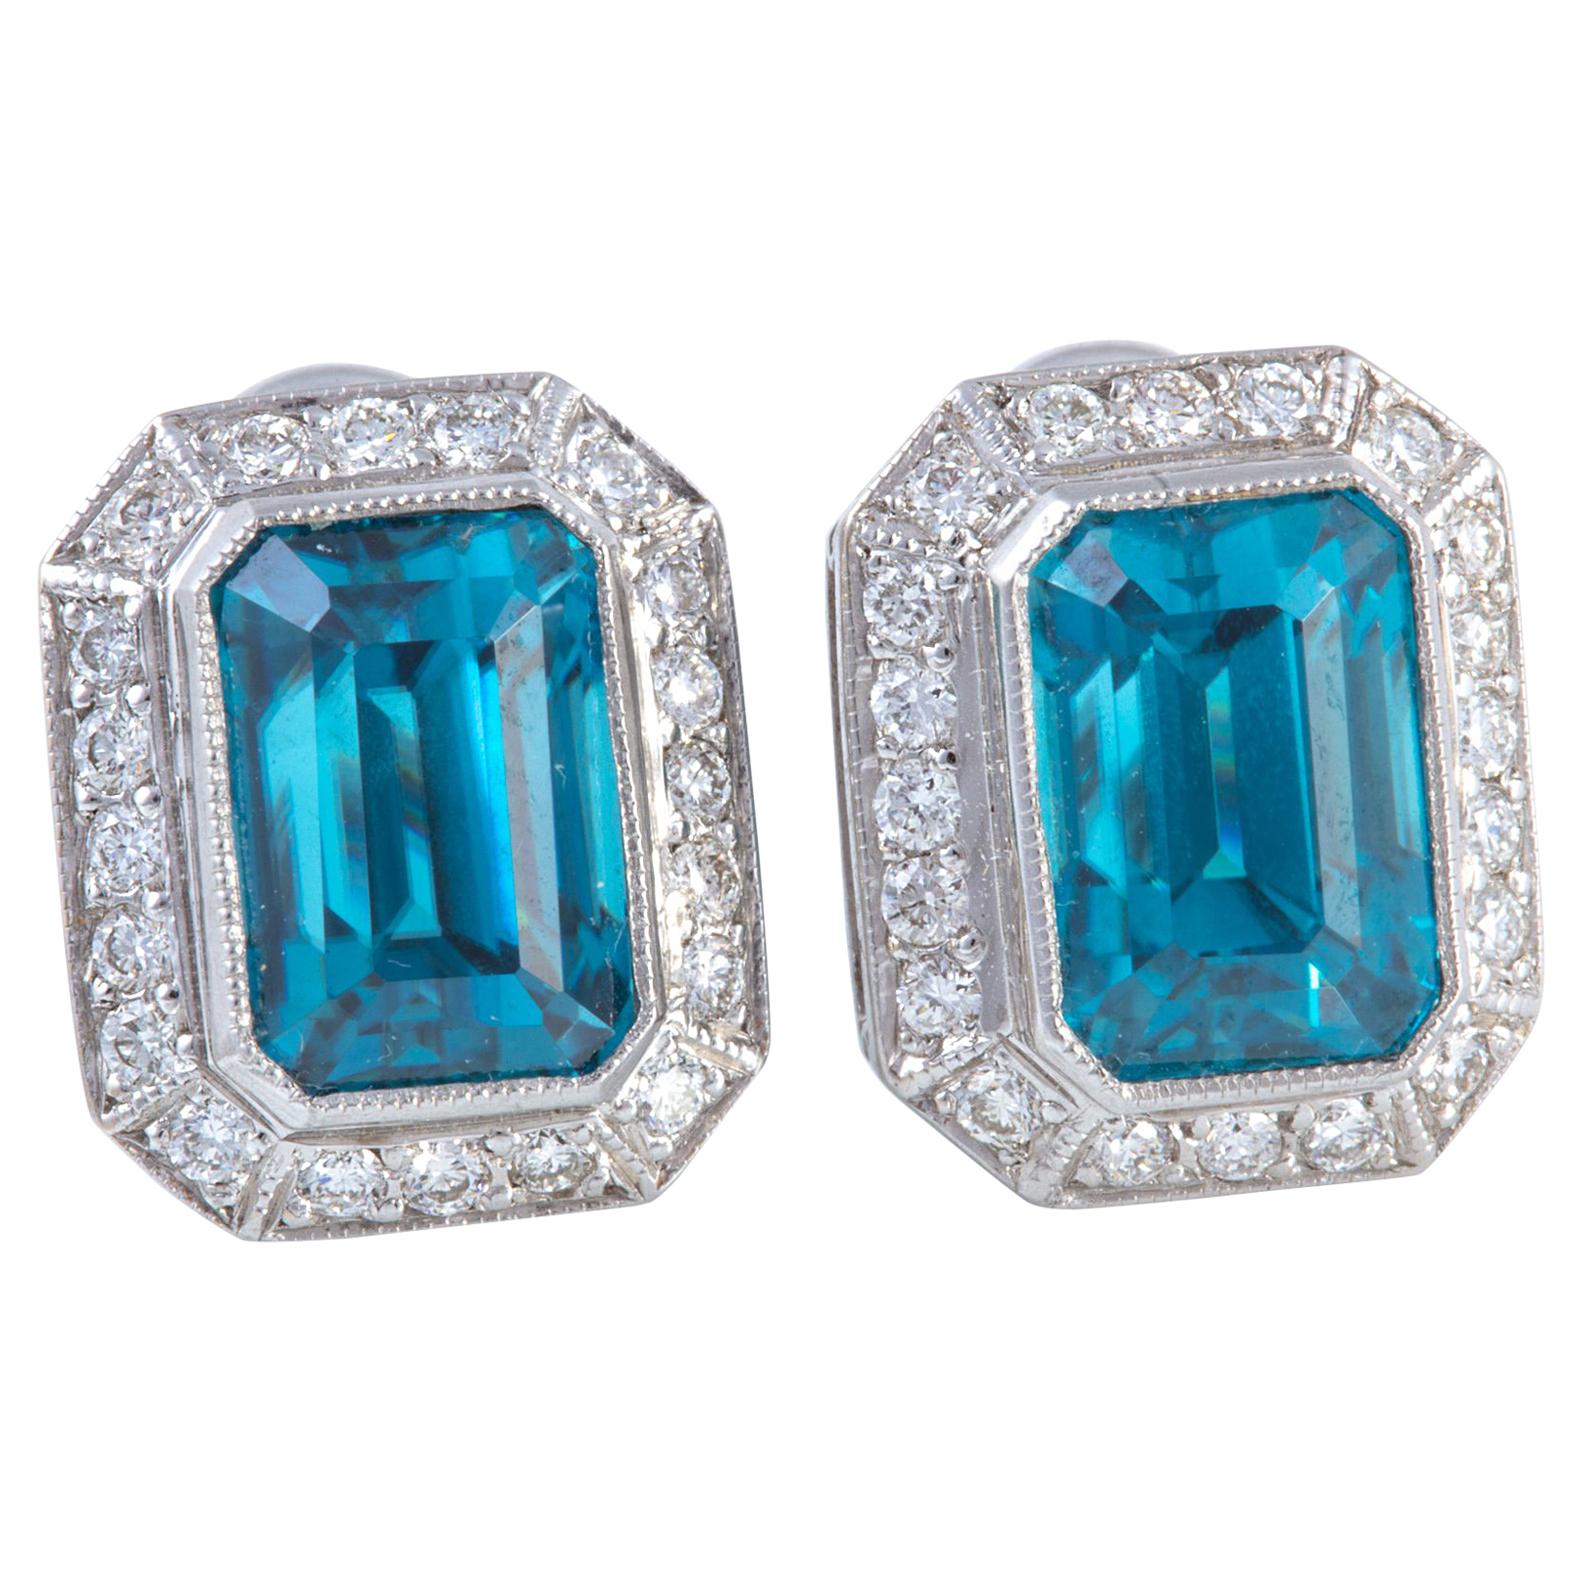 Cambodian Blue Zircon and Diamond Earrings Set in 18 Karat Gold and Platinum For Sale